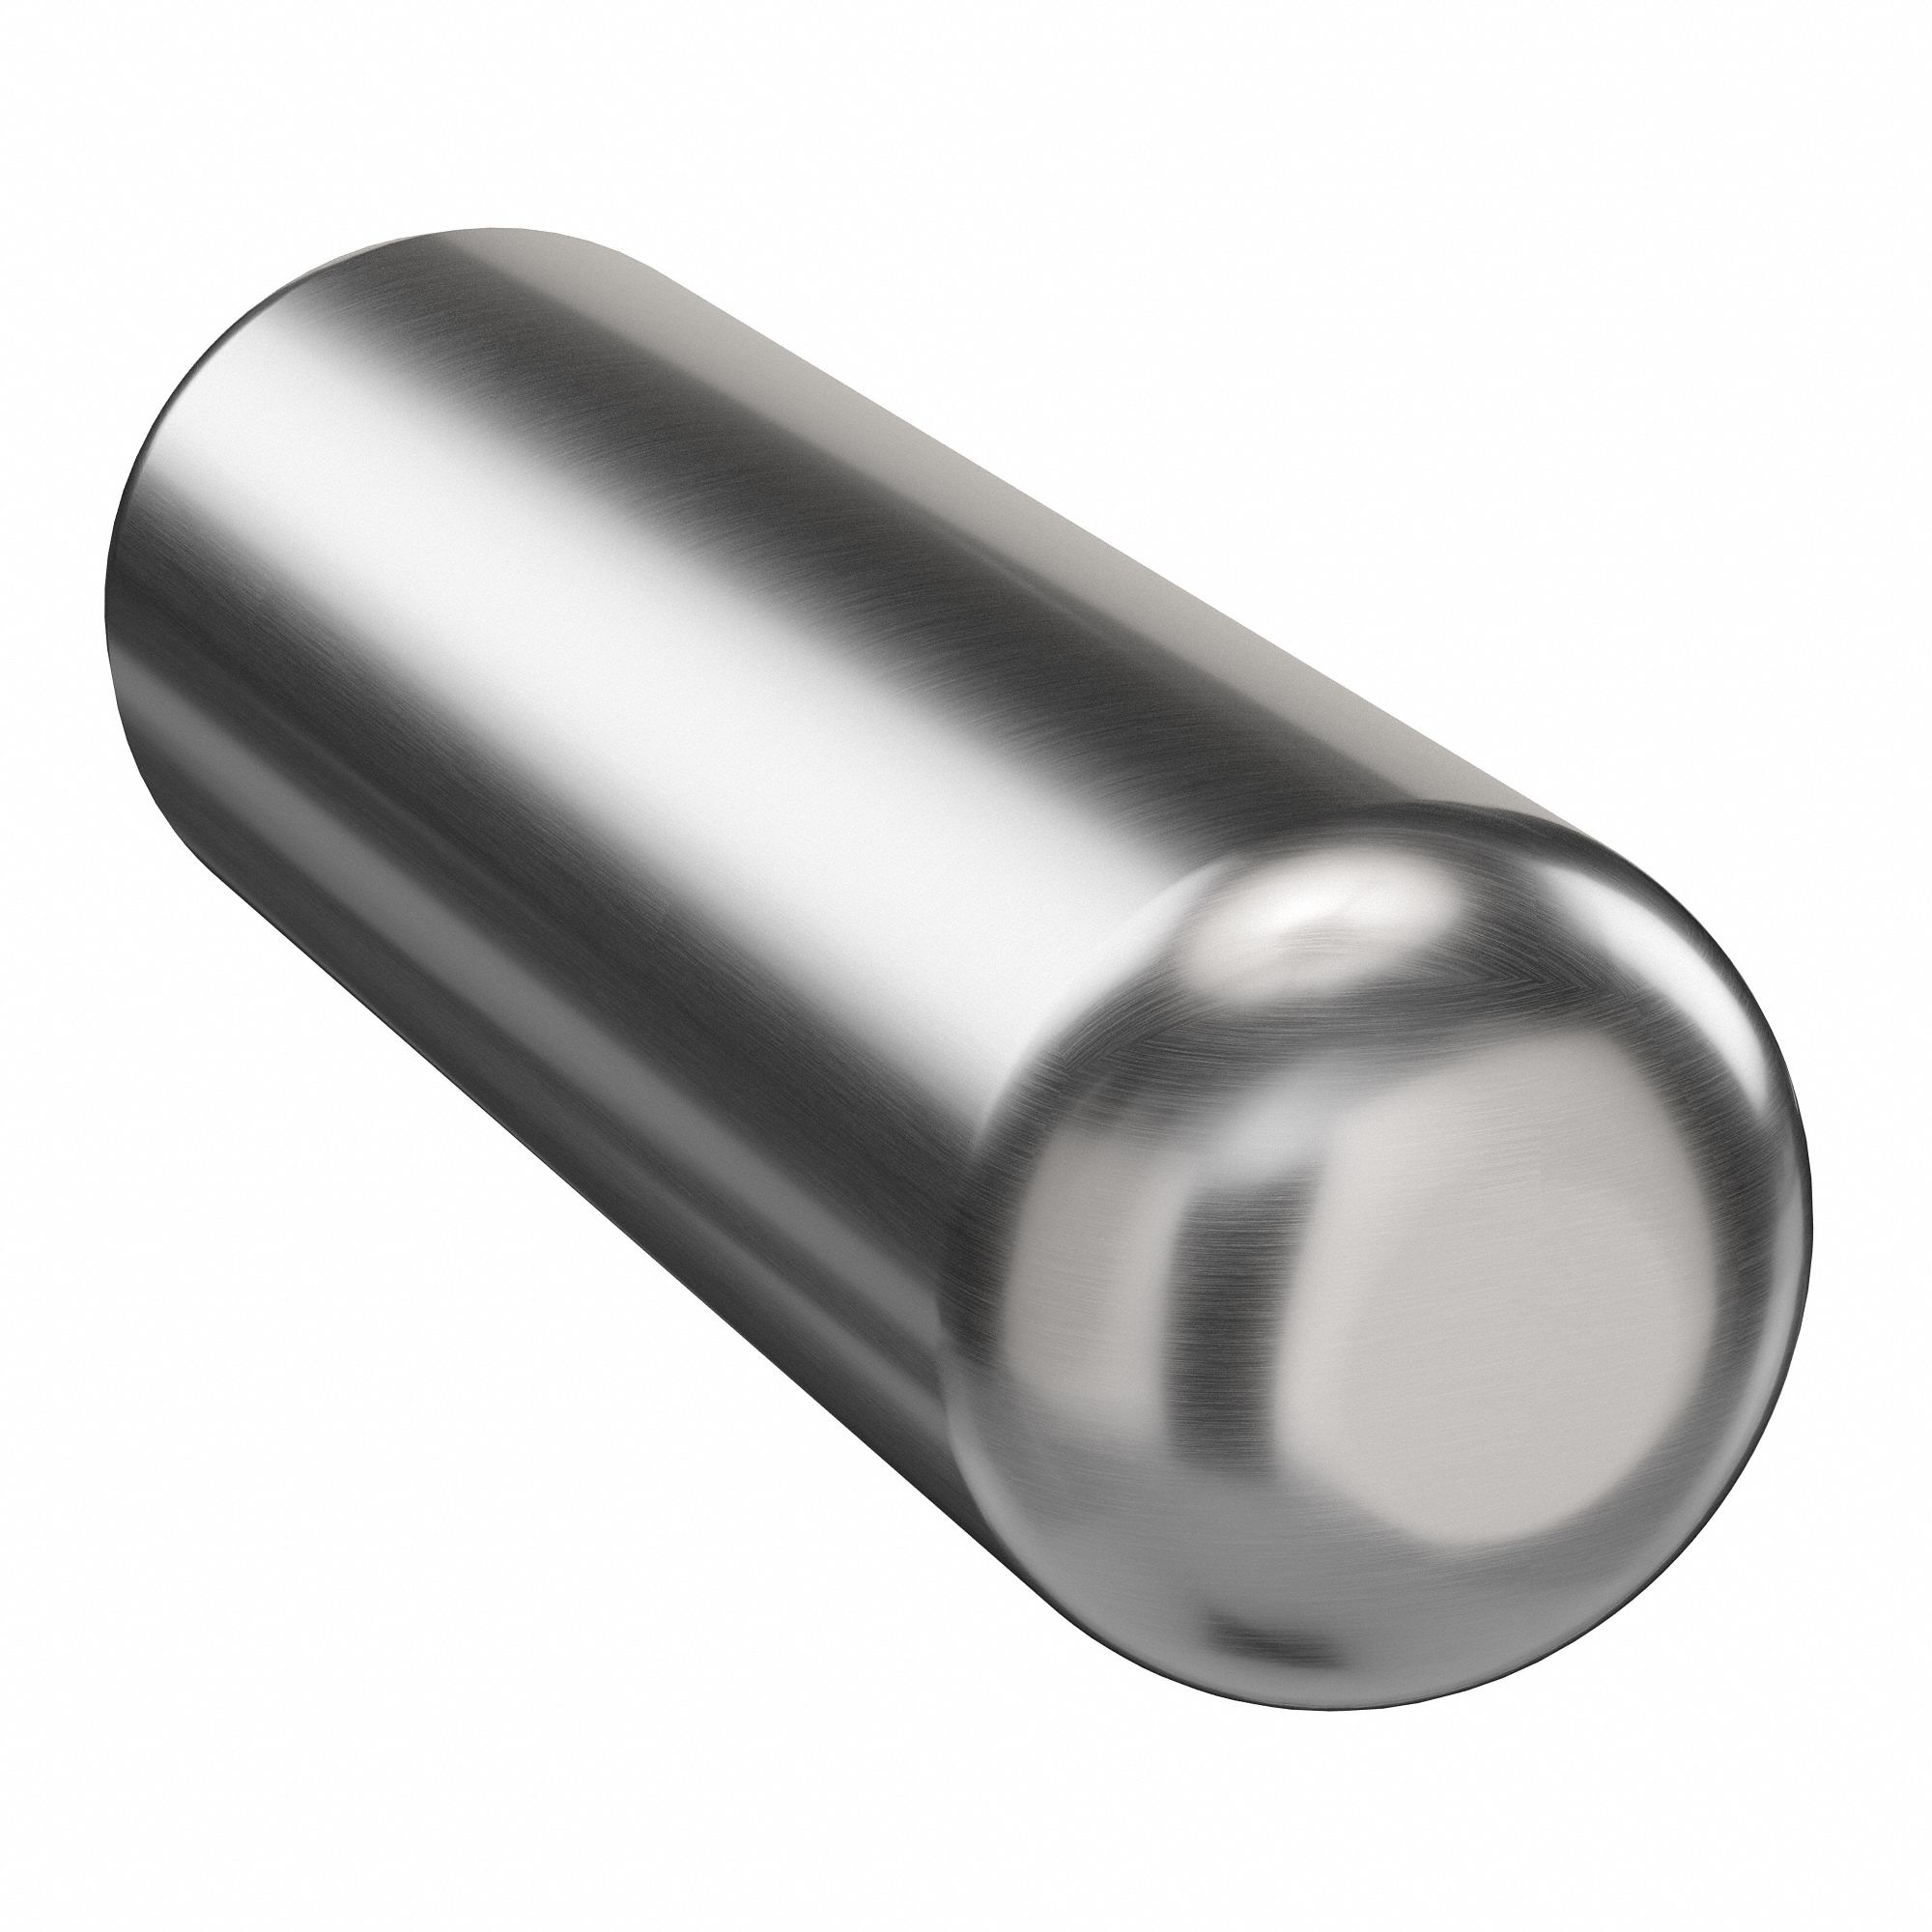 3/32" x 1 1/4" Dowel Pin Hardened And Ground Alloy Steel Bright Finish 